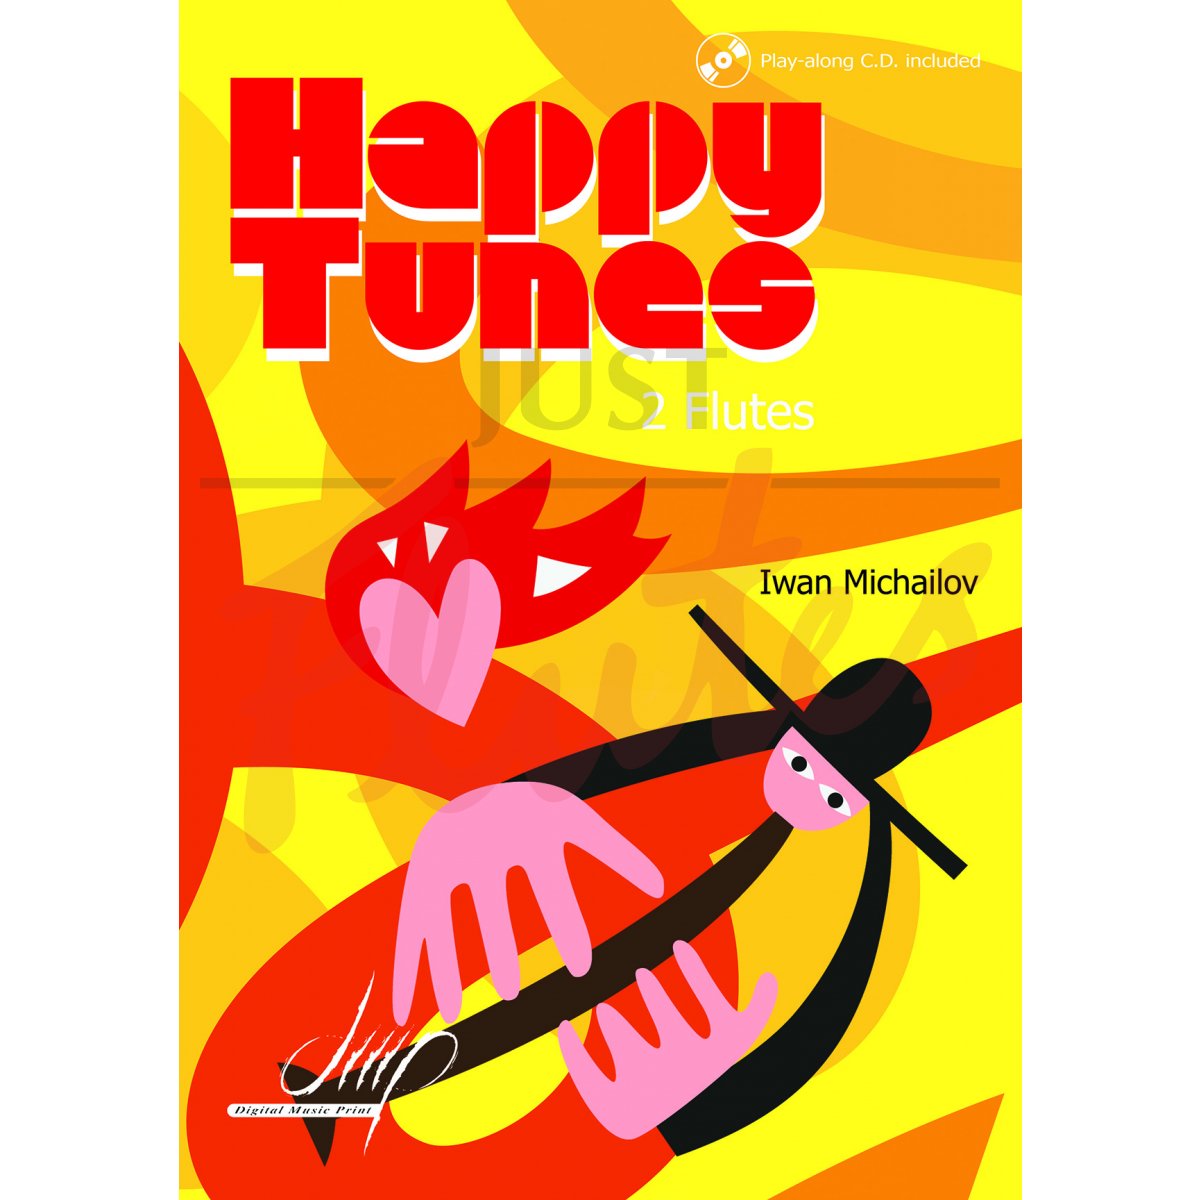 Happy Tunes for 2 flutes (play along)